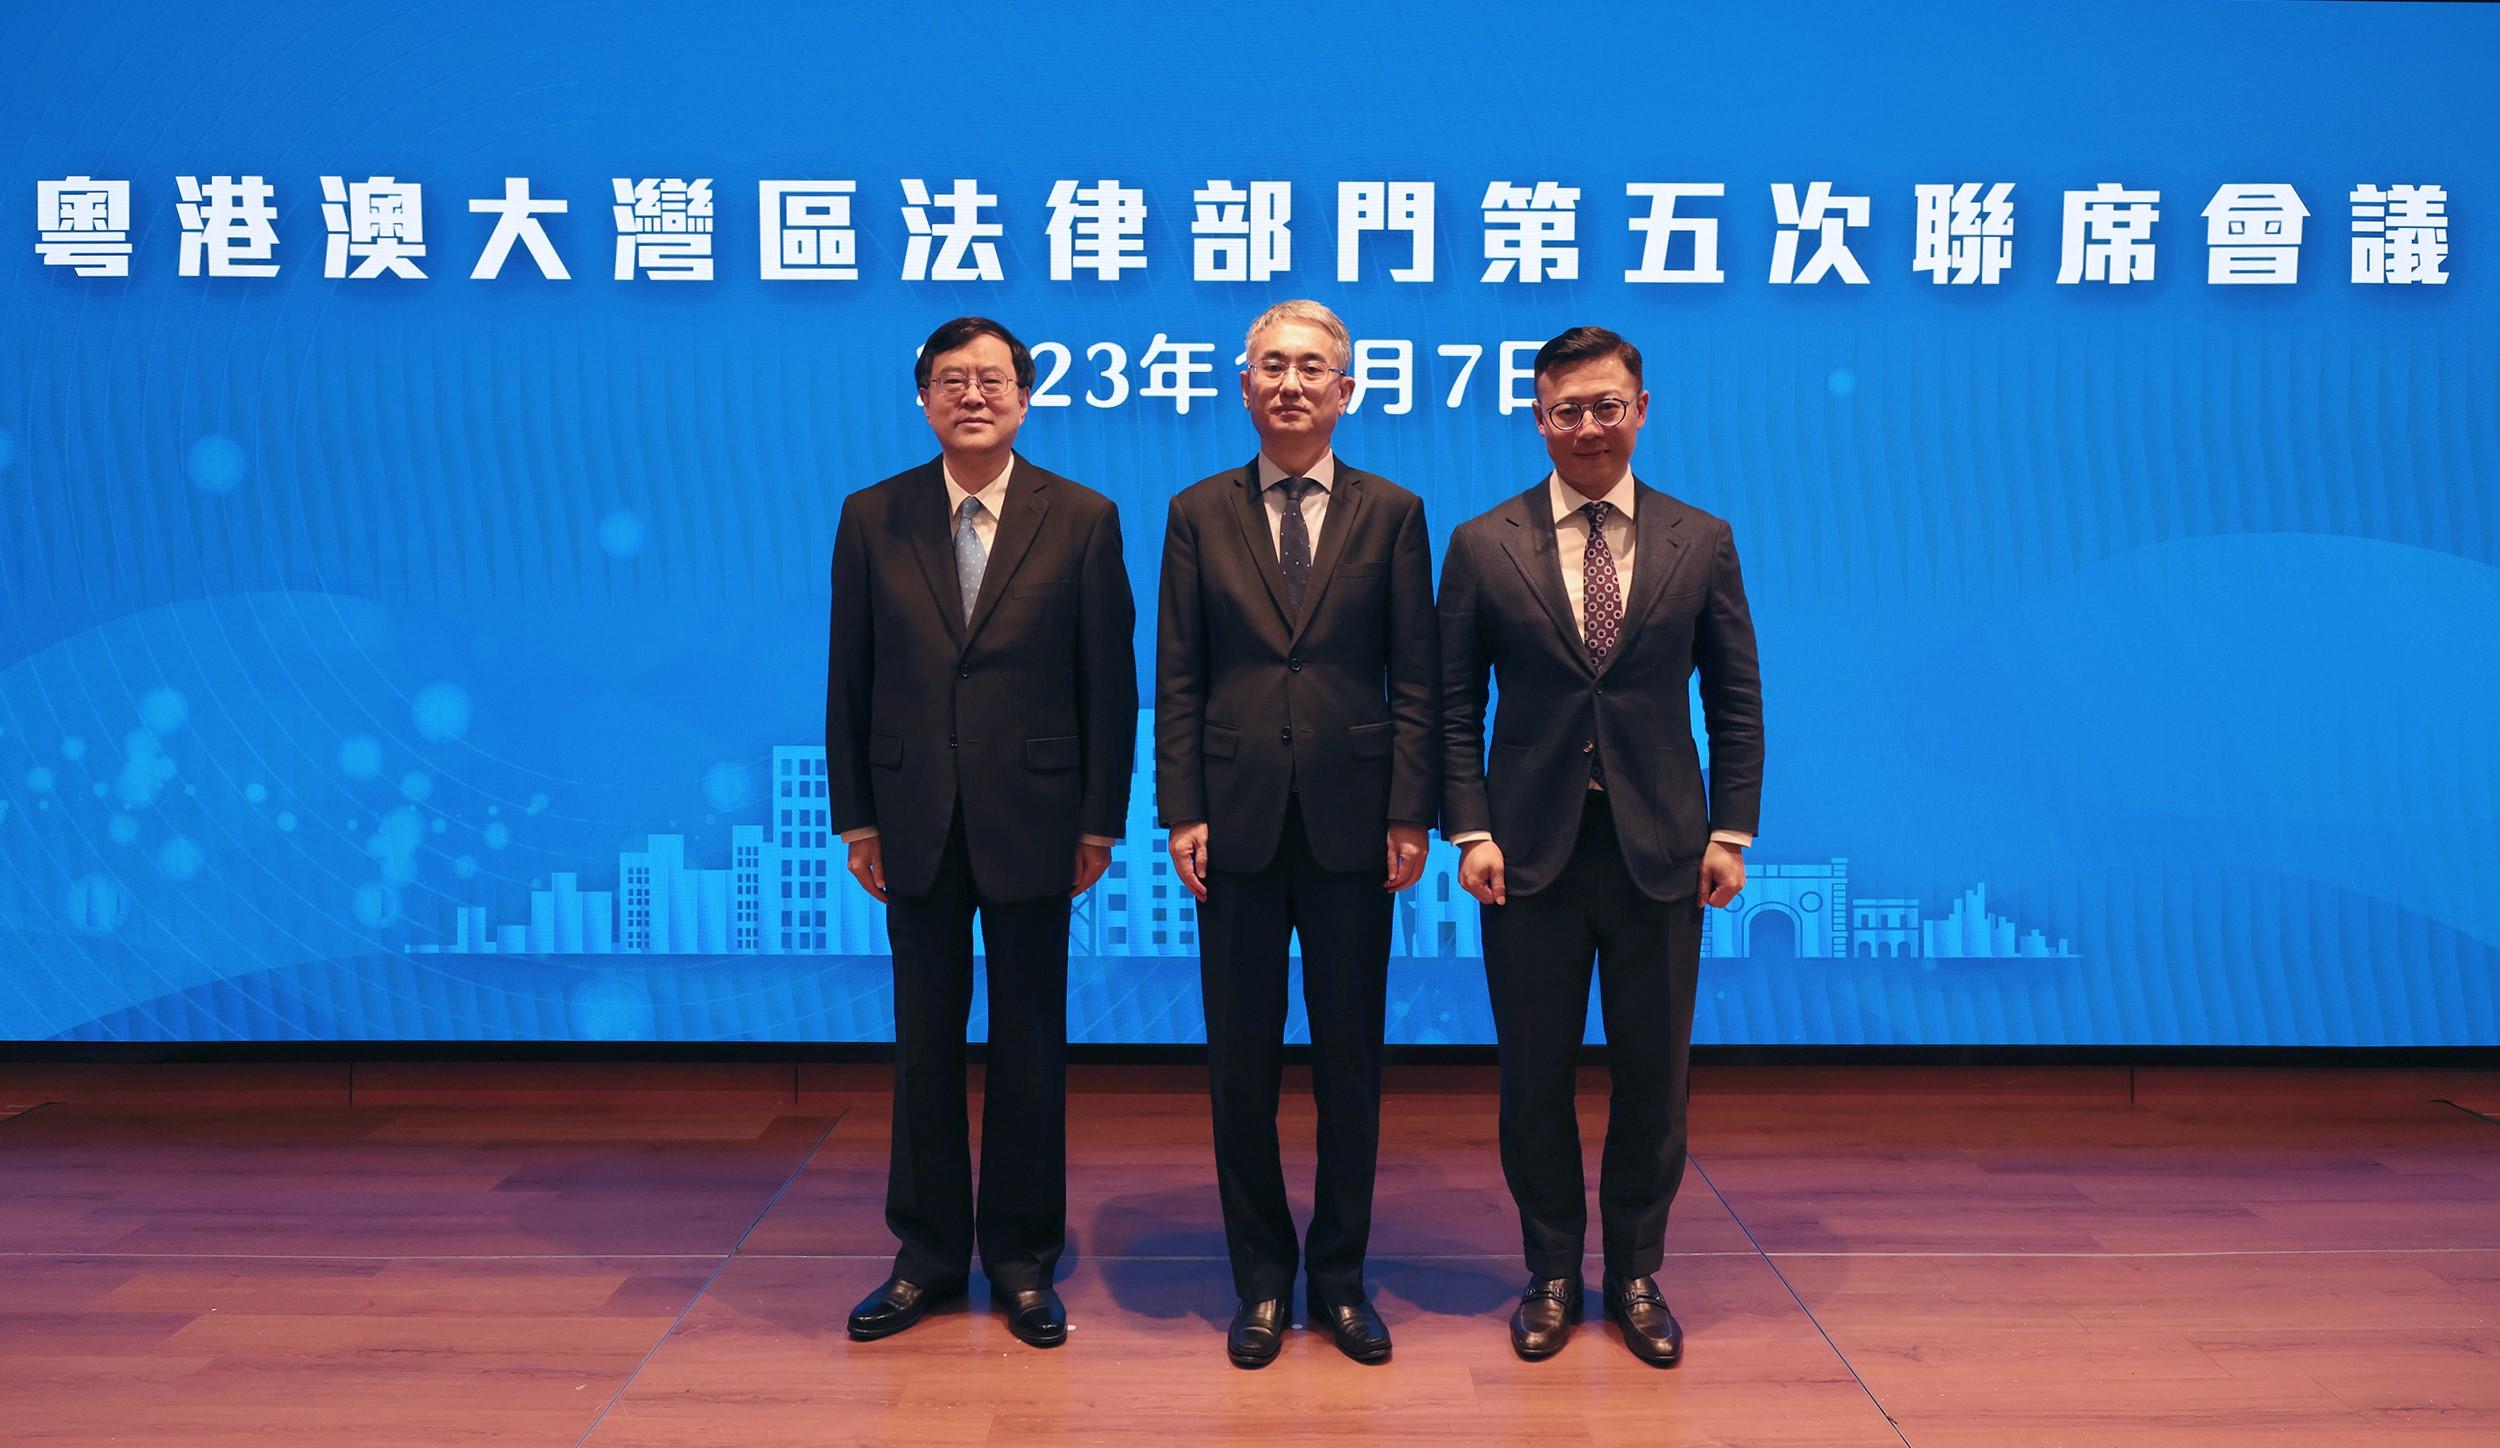 The fifth Guangdong-Hong Kong-Macao Greater Bay Area Legal Departments Joint Conference was held in Macao today (December 7). Photo shows (from left) the Director-General of the Department of Justice of Guangdong Province, Mr Chen Xudong; the Secretary for Administration and Justice of the Macao Special Administrative Region Government, Mr Cheong Weng Chon; and the Deputy Secretary for Justice, Mr Cheung Kwok-kwan, at the Joint Conference.
